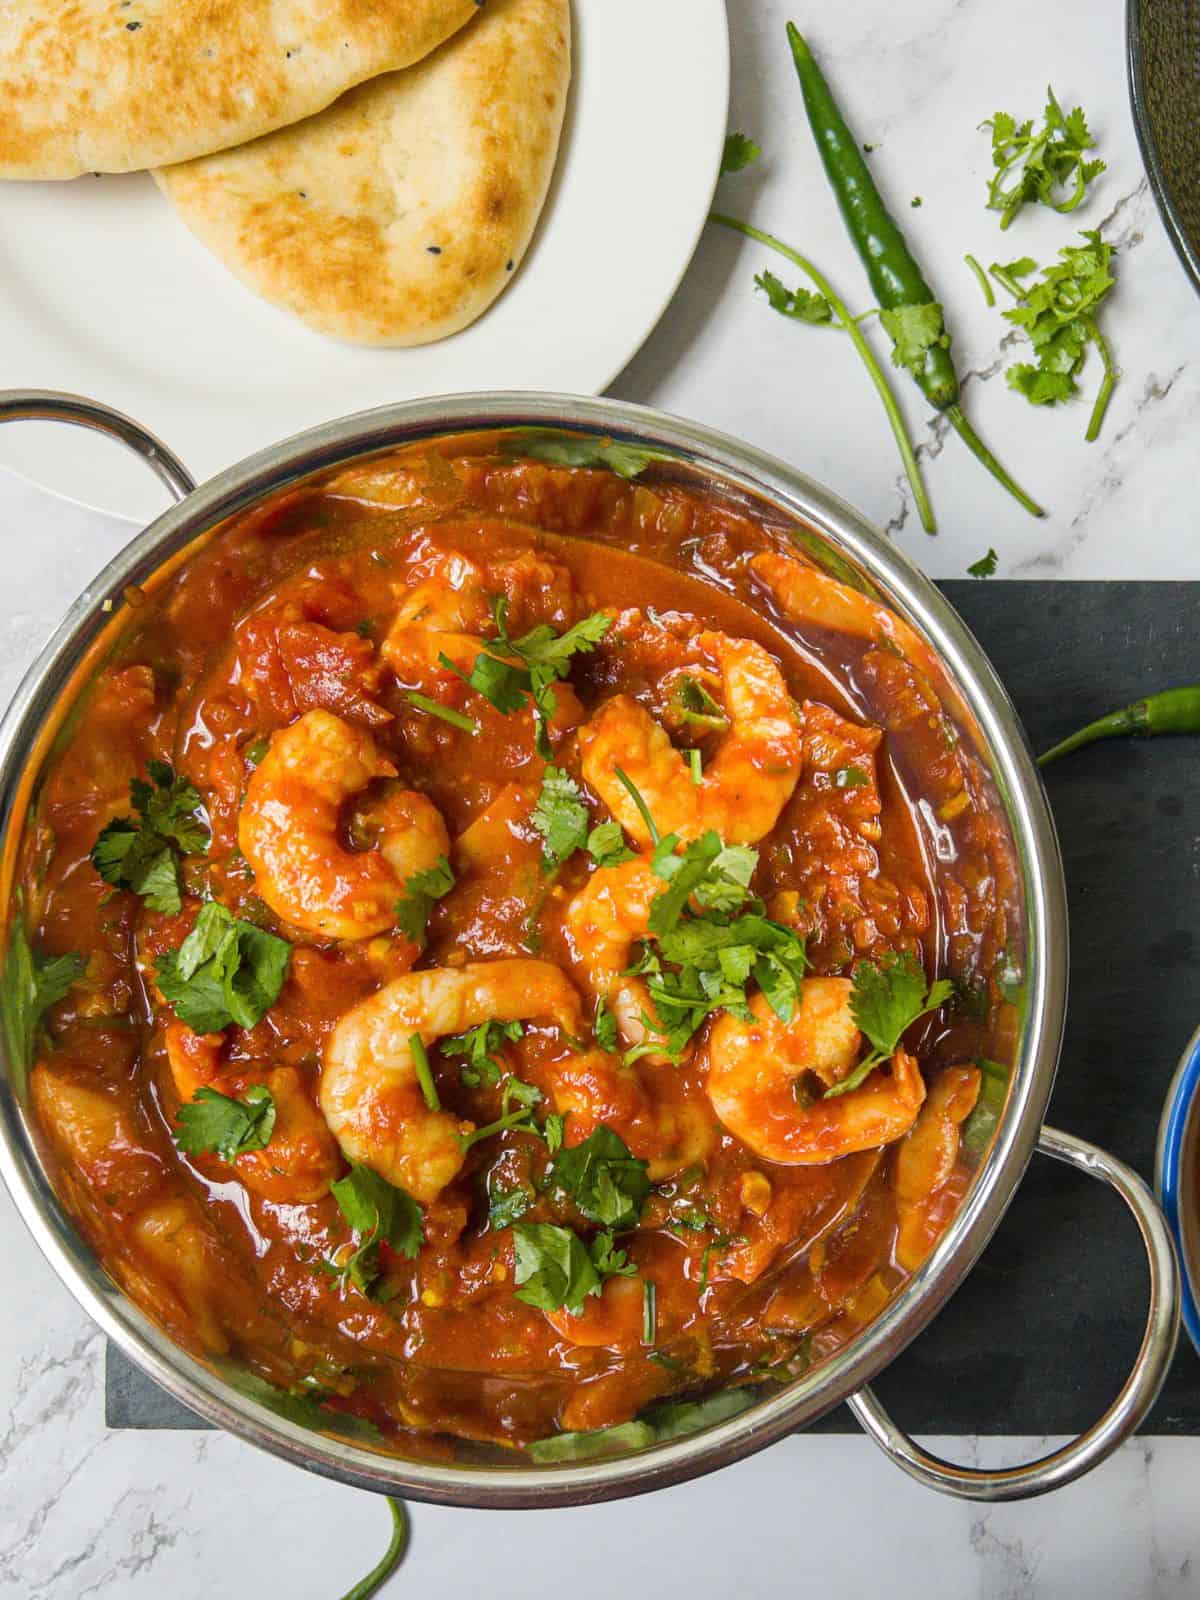 Prawn balti in a stainless steel bowl with naan bread and green chillis in the background.